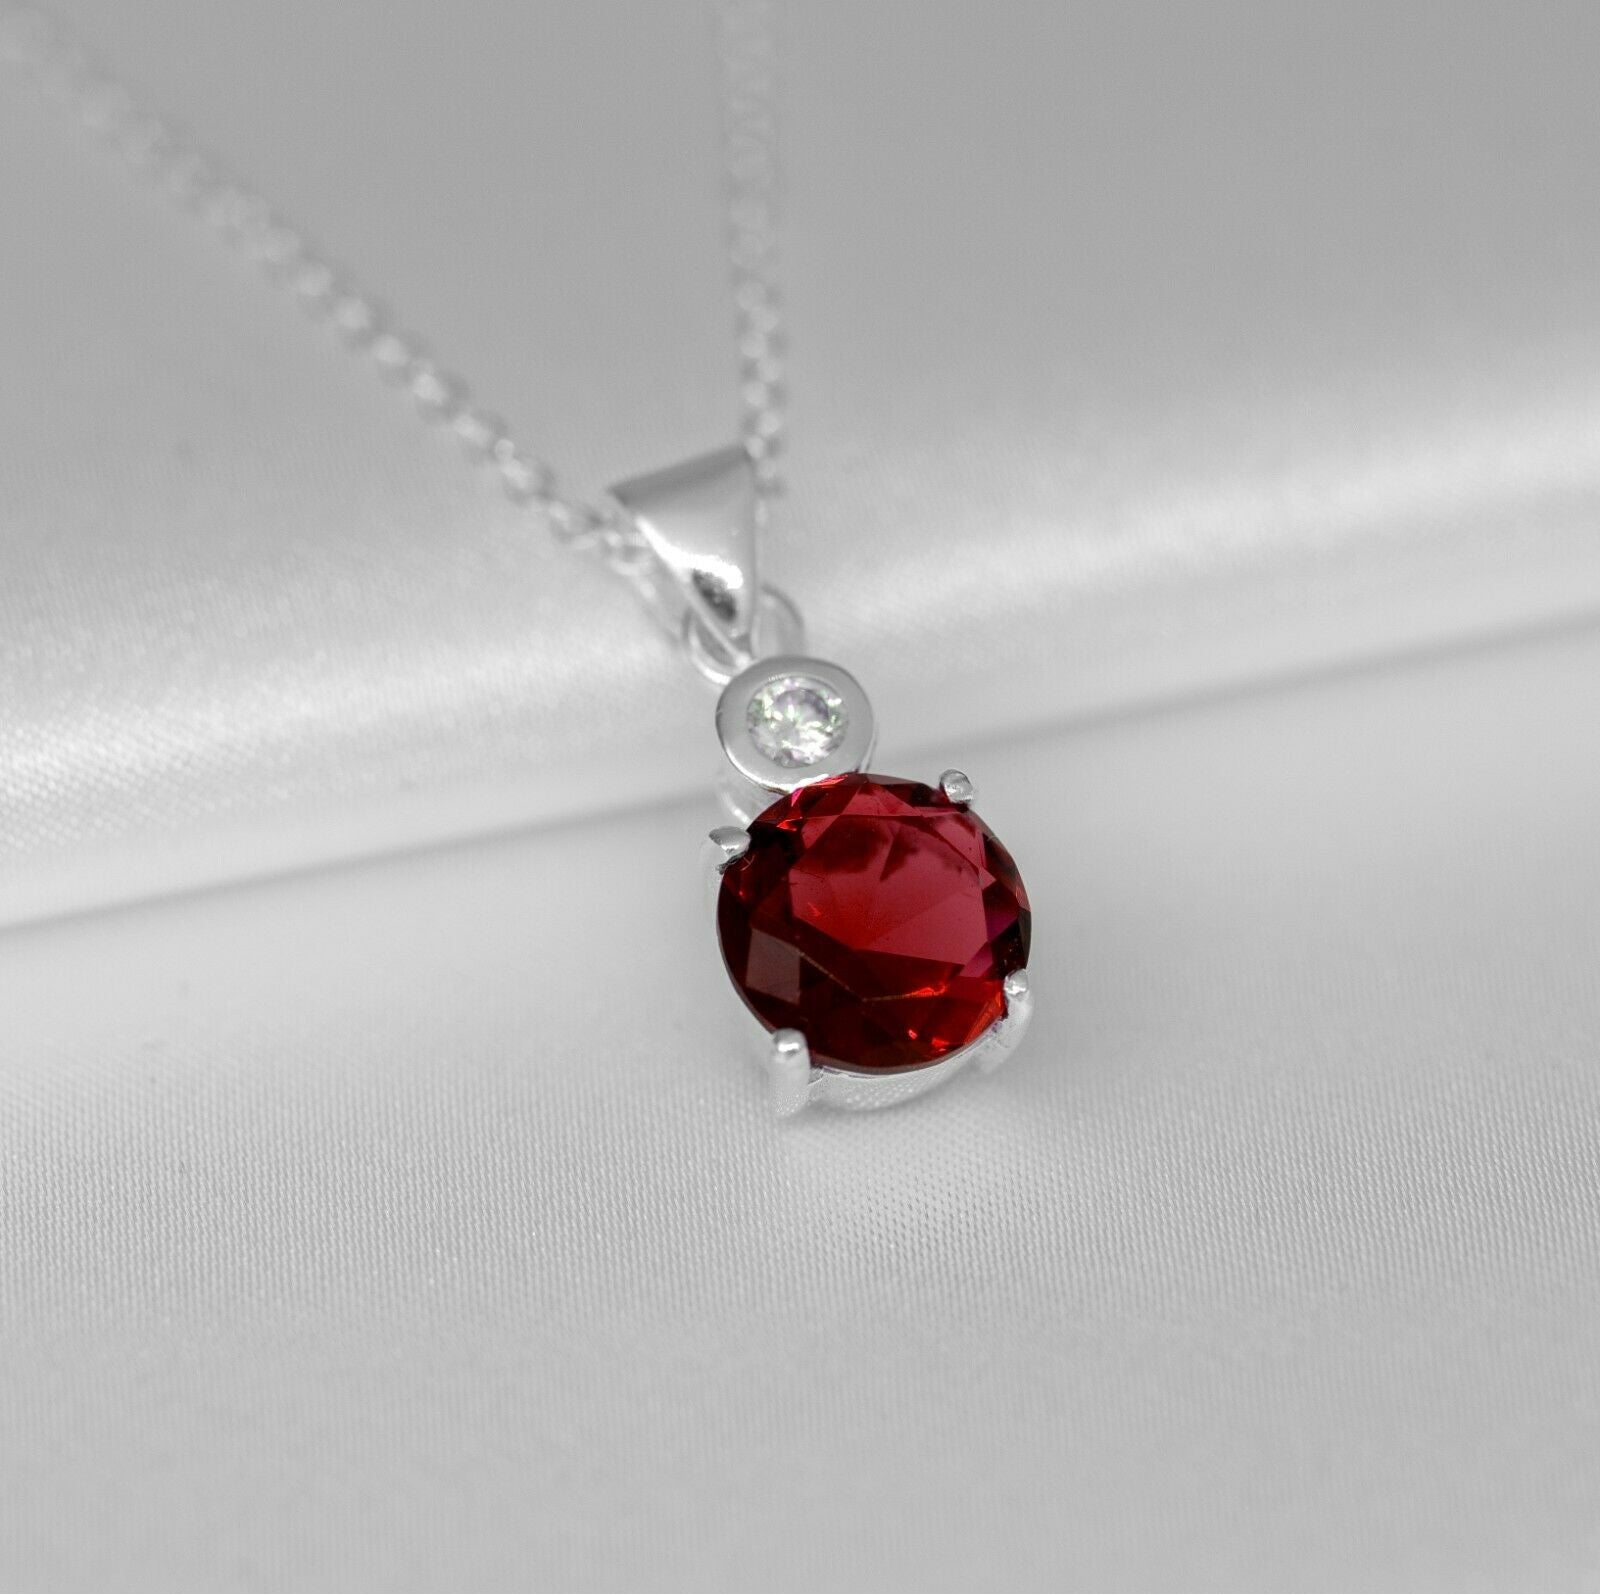 Red Garnet And Diamond Sterling Silver Pendant Necklace Ladies Jewellery Gift